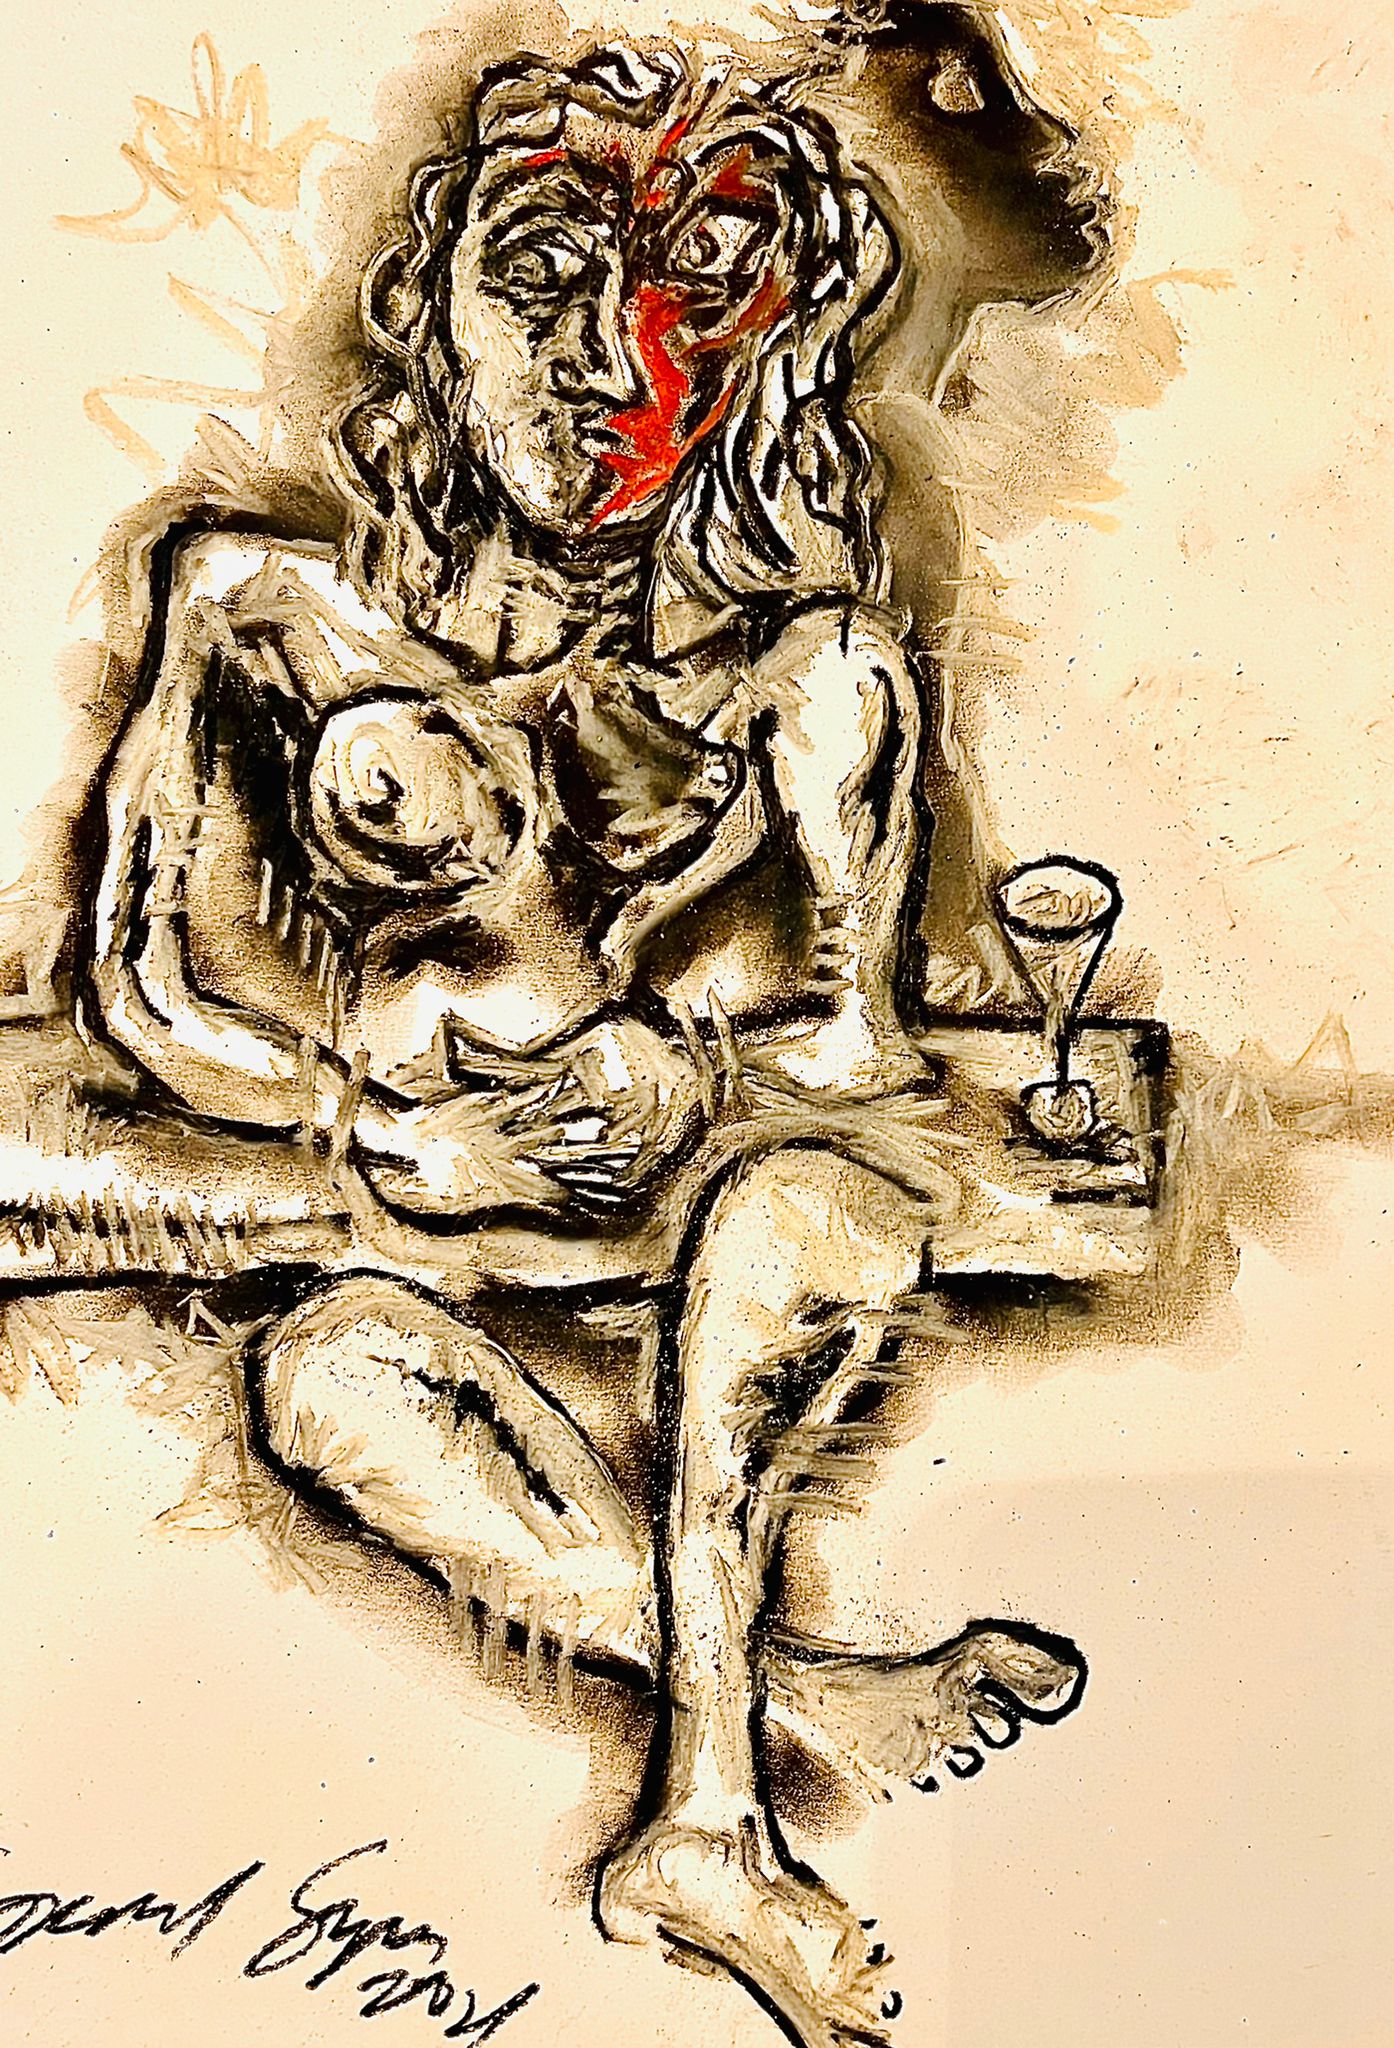 Buy Evening Alone Painting the original Charcoal and Pastel on Paper artwork by Indian-American artist Gopaal Seyn | RedBlueArts.com